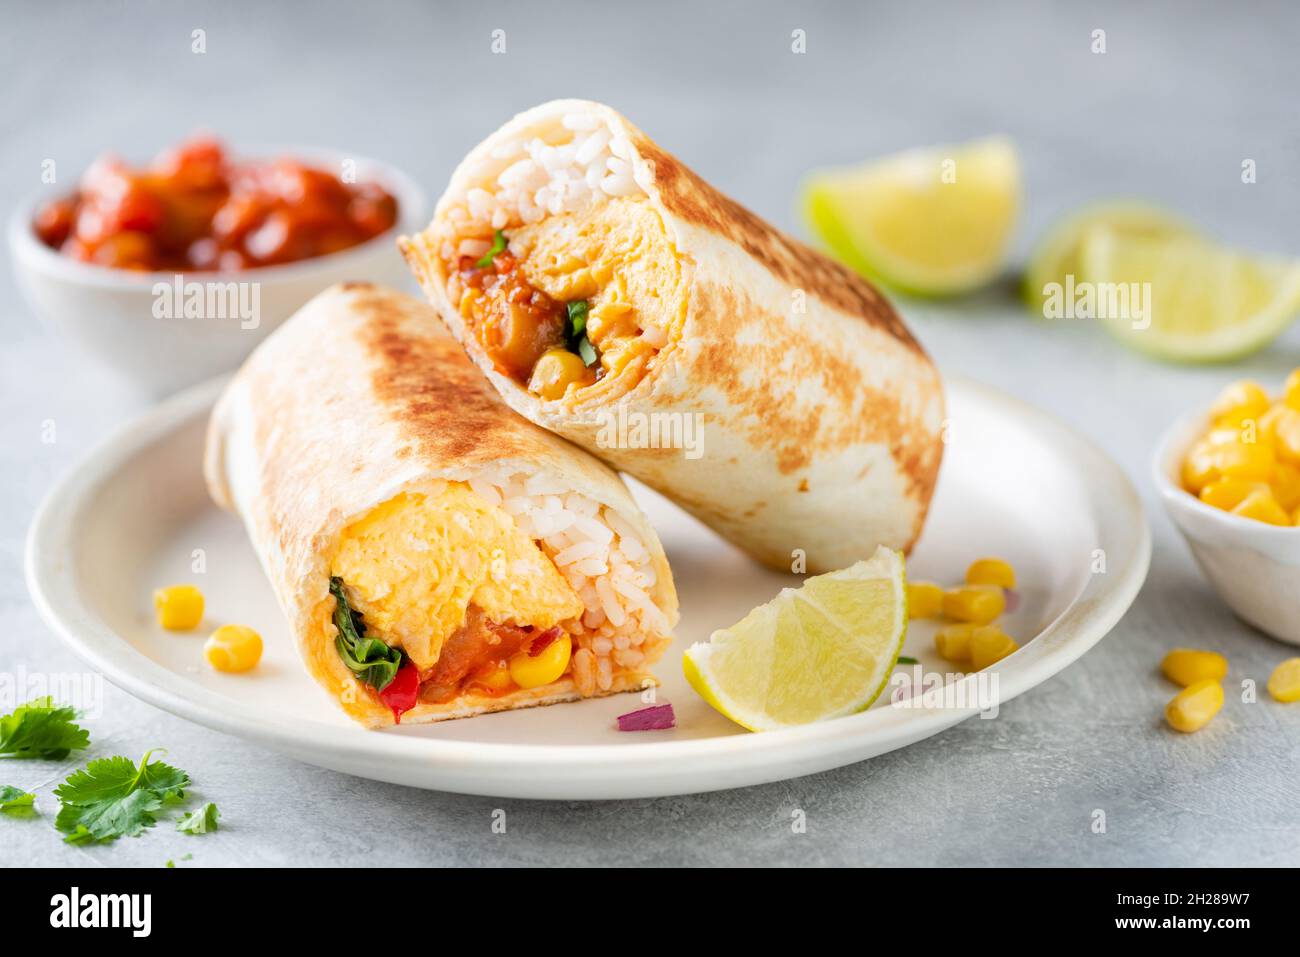 Breakfast vegetarian burrito wrap with omelette and vegetables on a plate. Tortilla wrap sandwich Stock Photo